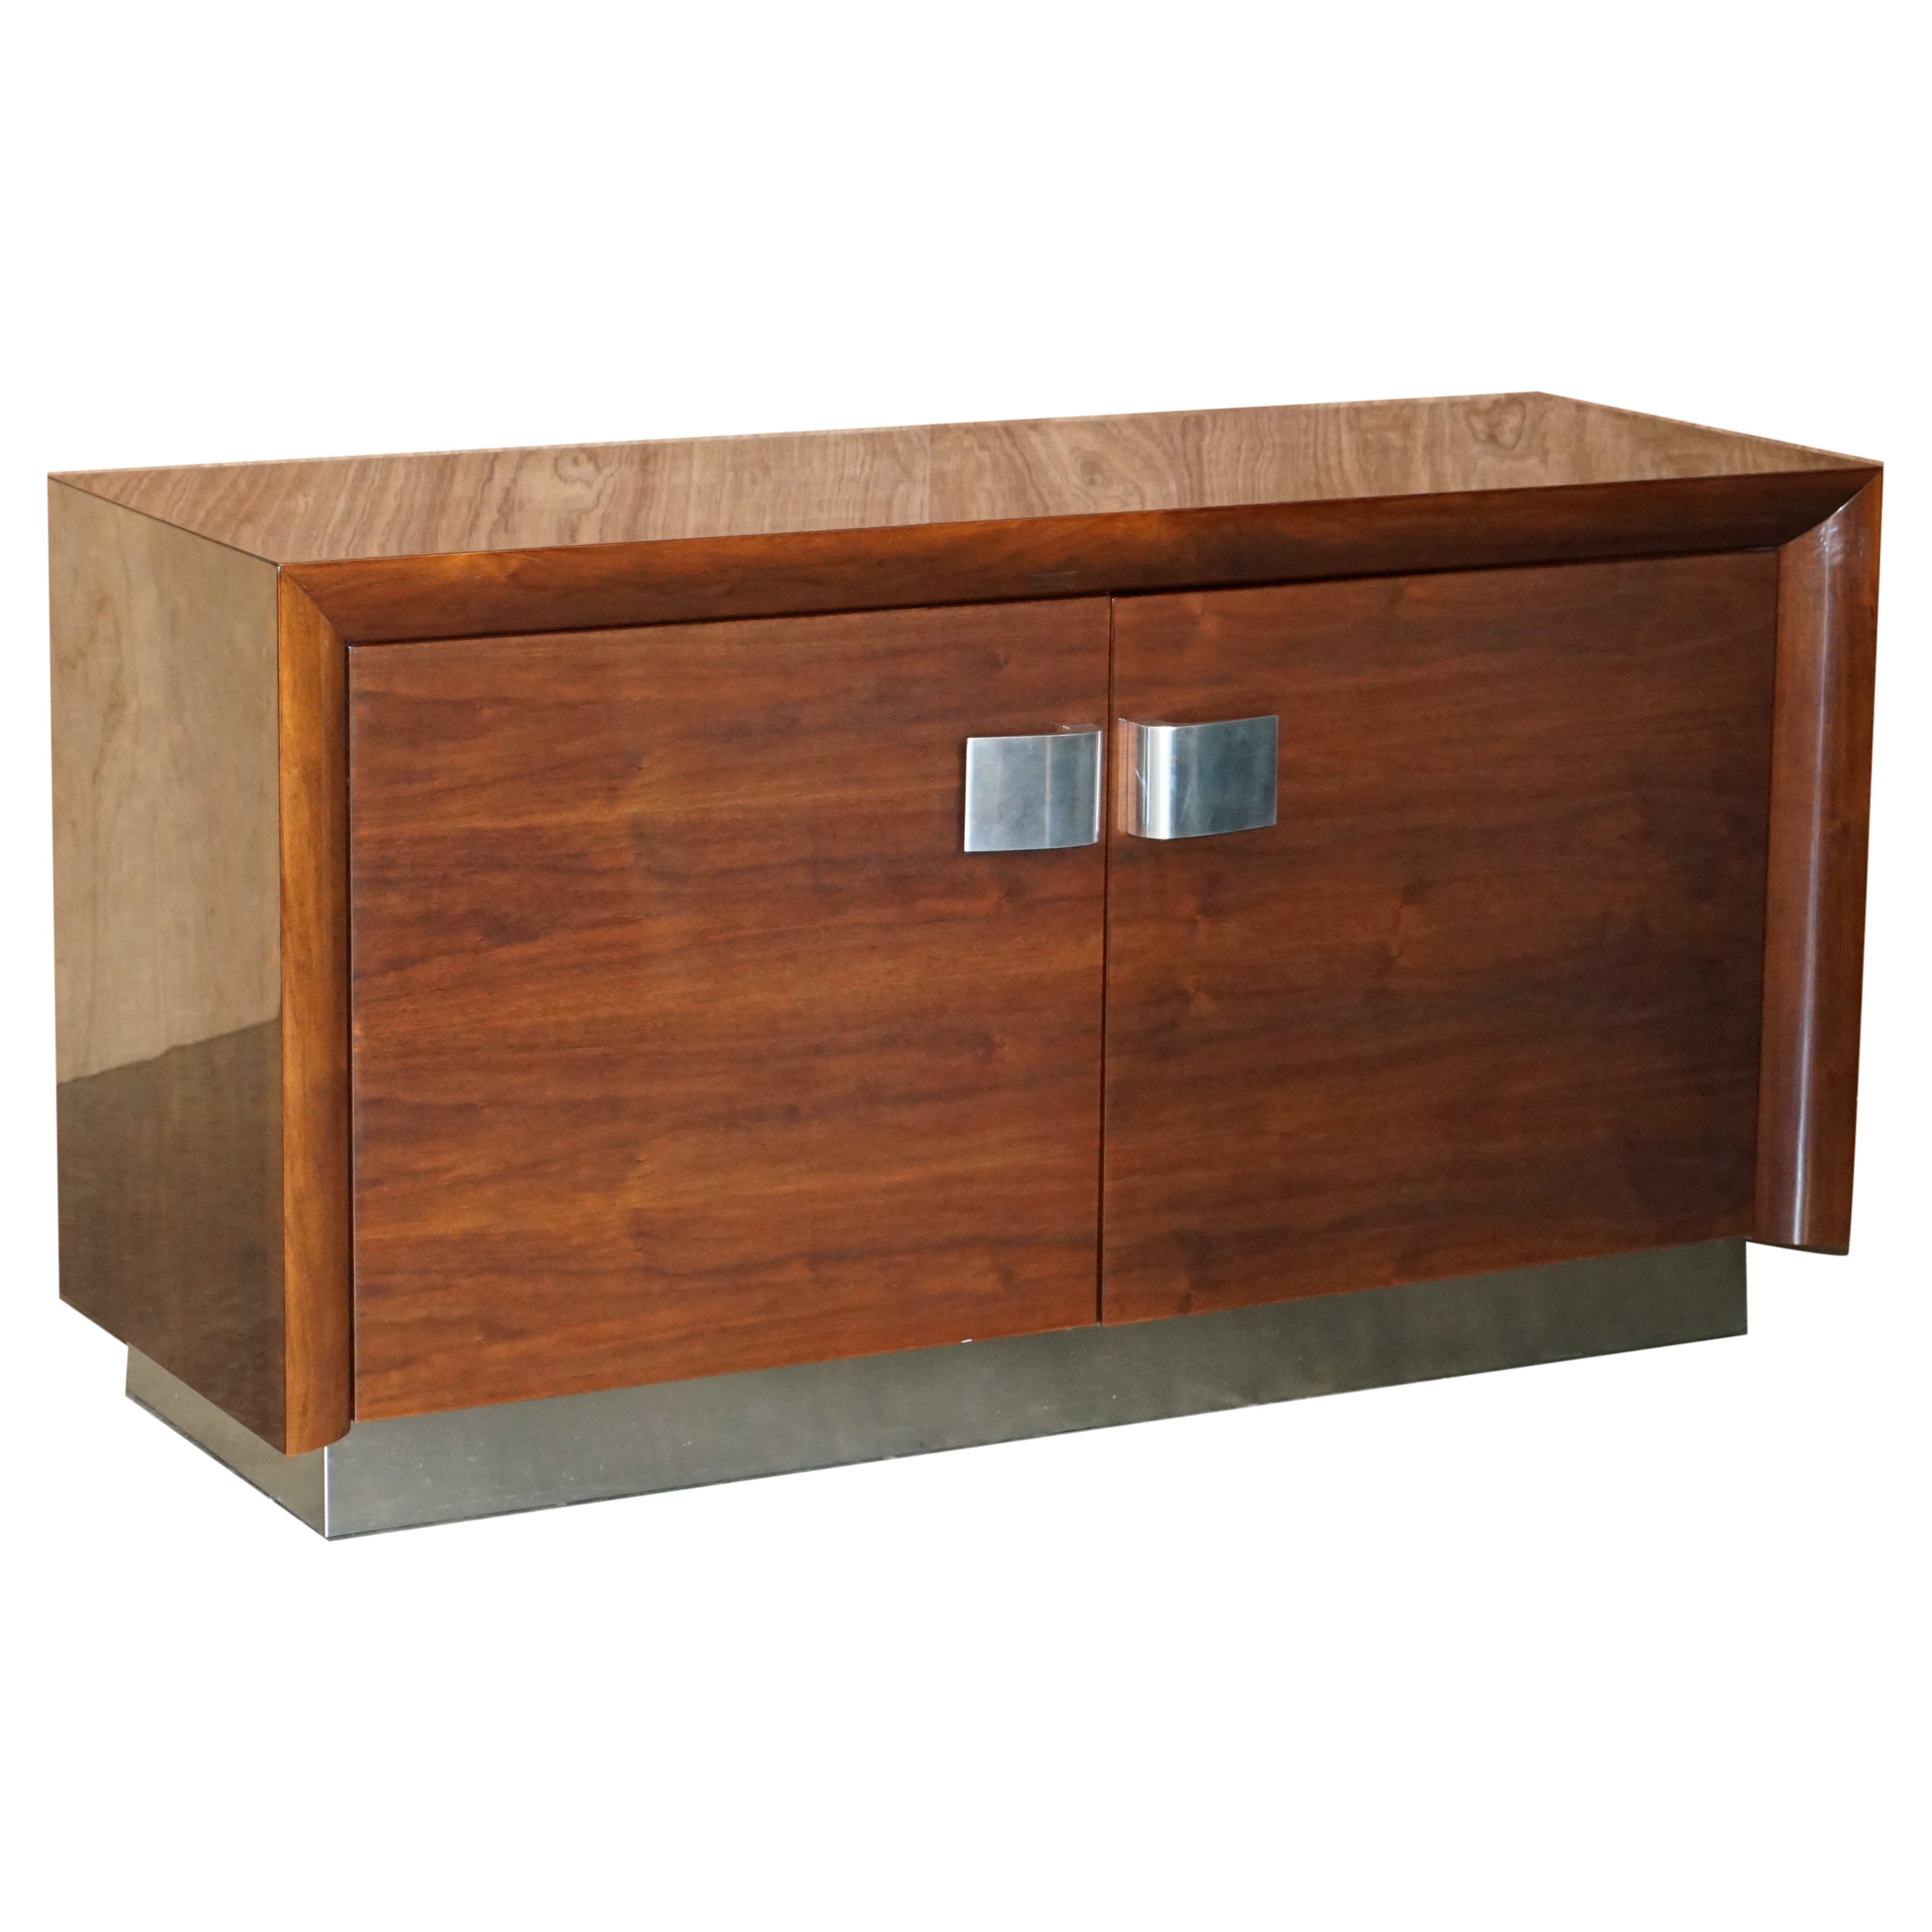 Malerba Hand Made in Italy Walnut & Chrome Designer Sideboard For Sale